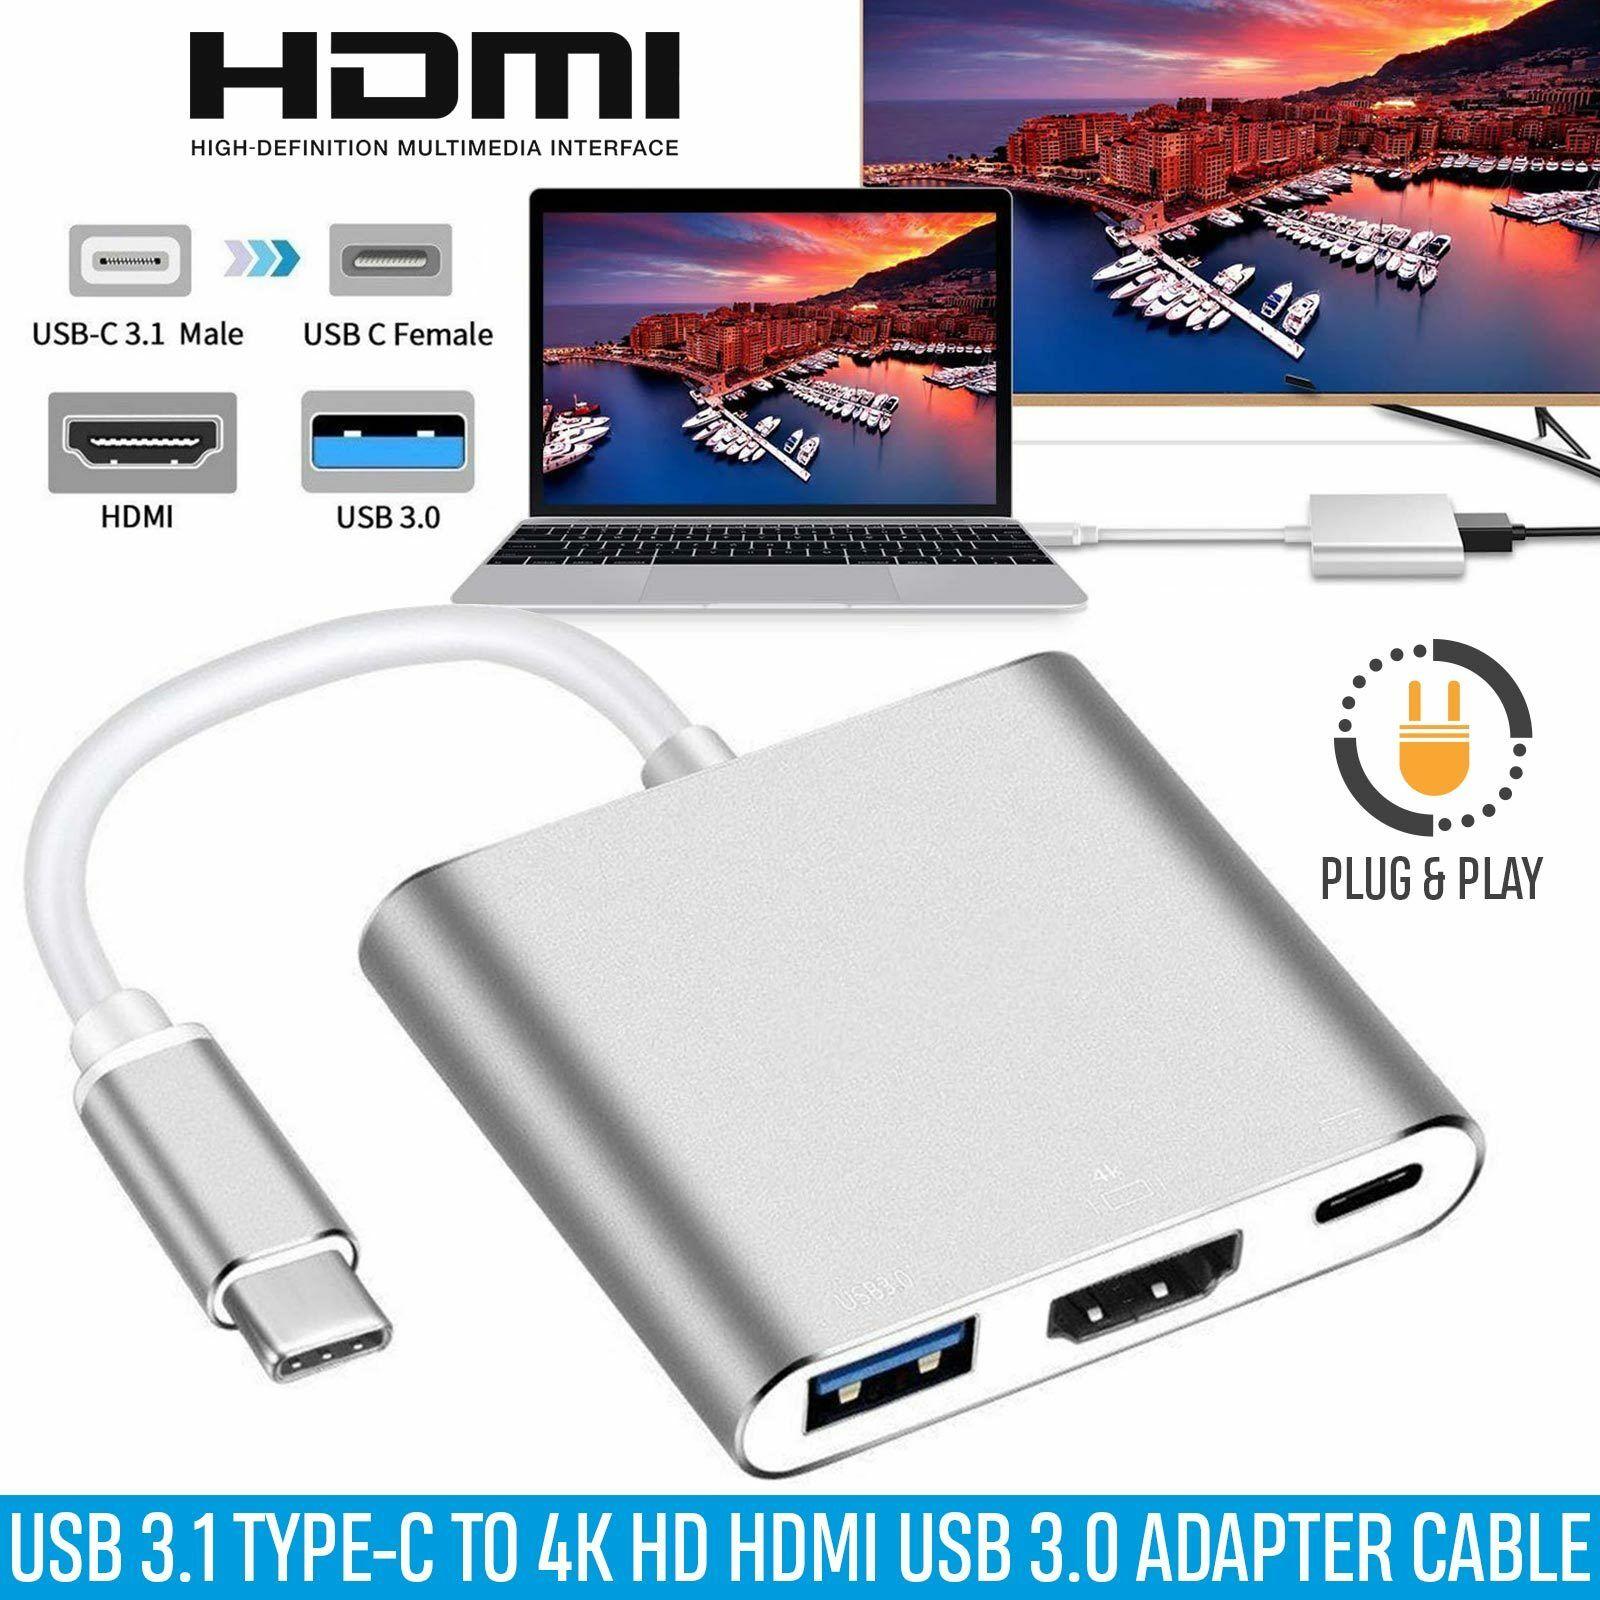 USB C To HDMI Adapter, Type C To HDMI 4K USB 3.0 USB-C Converter USB 3.0 Charging Port Cable For 2017/2016 MacBook Pro